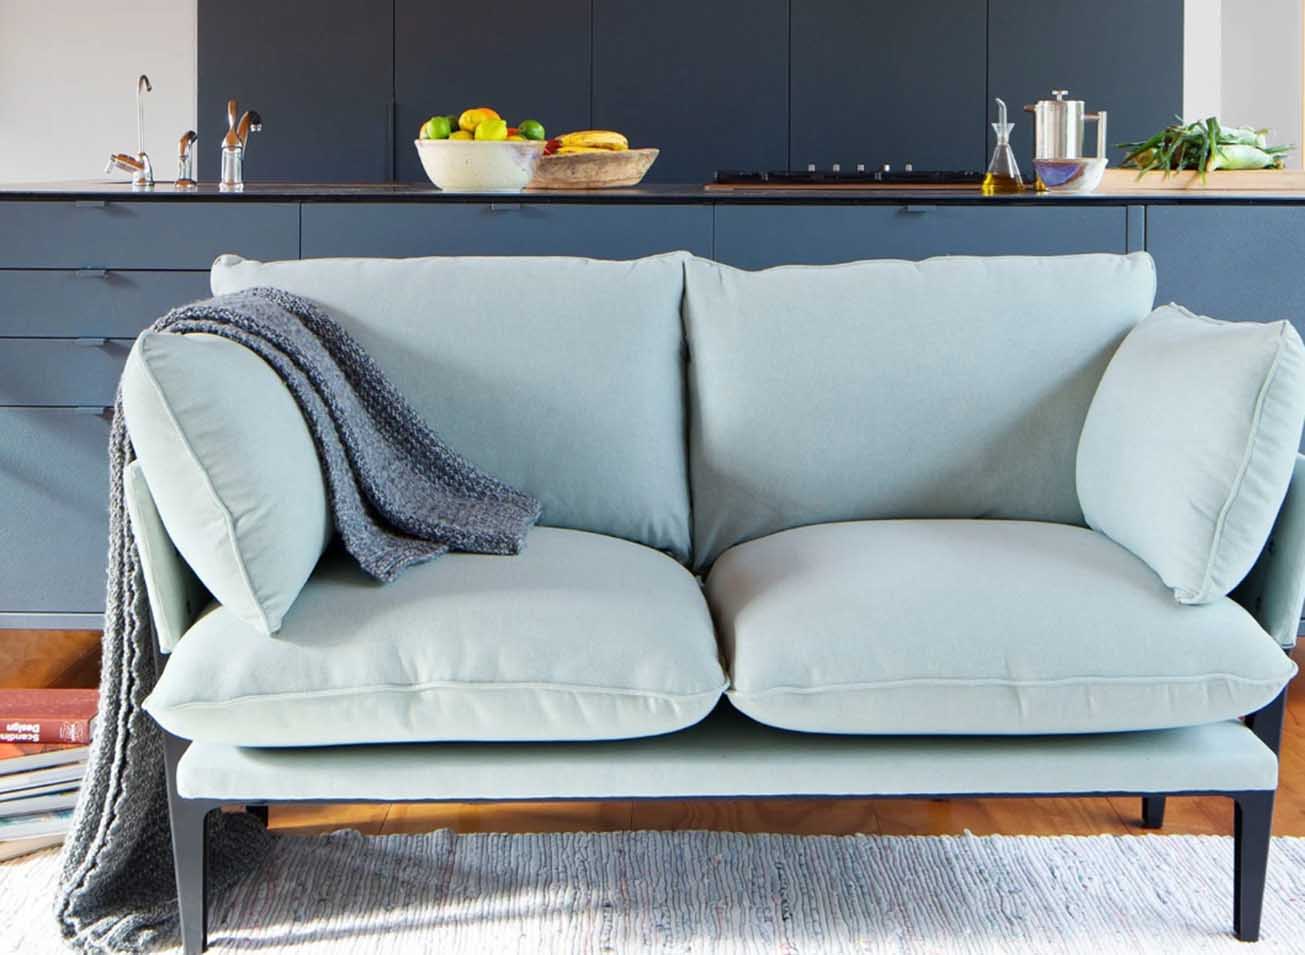 Diverse Sofa Choices: From Stylish Floyd to Luxurious Greyleigh